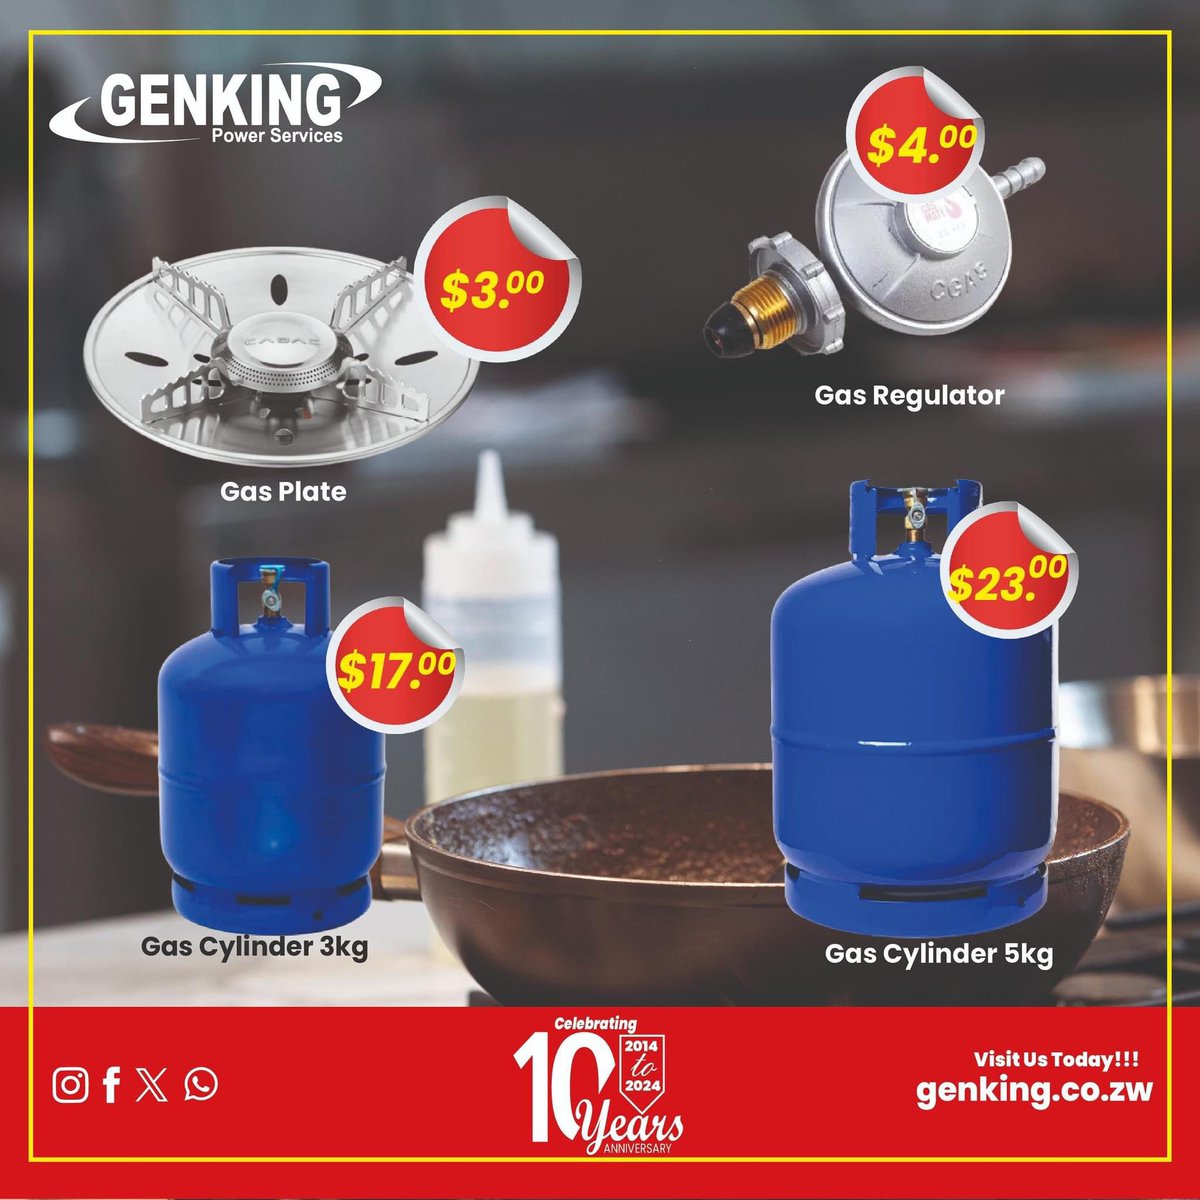 Fuel your cooking passion with top-notch gas tanks and accessories from any Genking store near you today! Cook with ease and convenience like never before 🔥🍳 #Genking #CookingMadeEasy Graniteside 90 Kelvin South 08644219566, 0774443500, 0242749498 Avondale Shop 1B Ground…